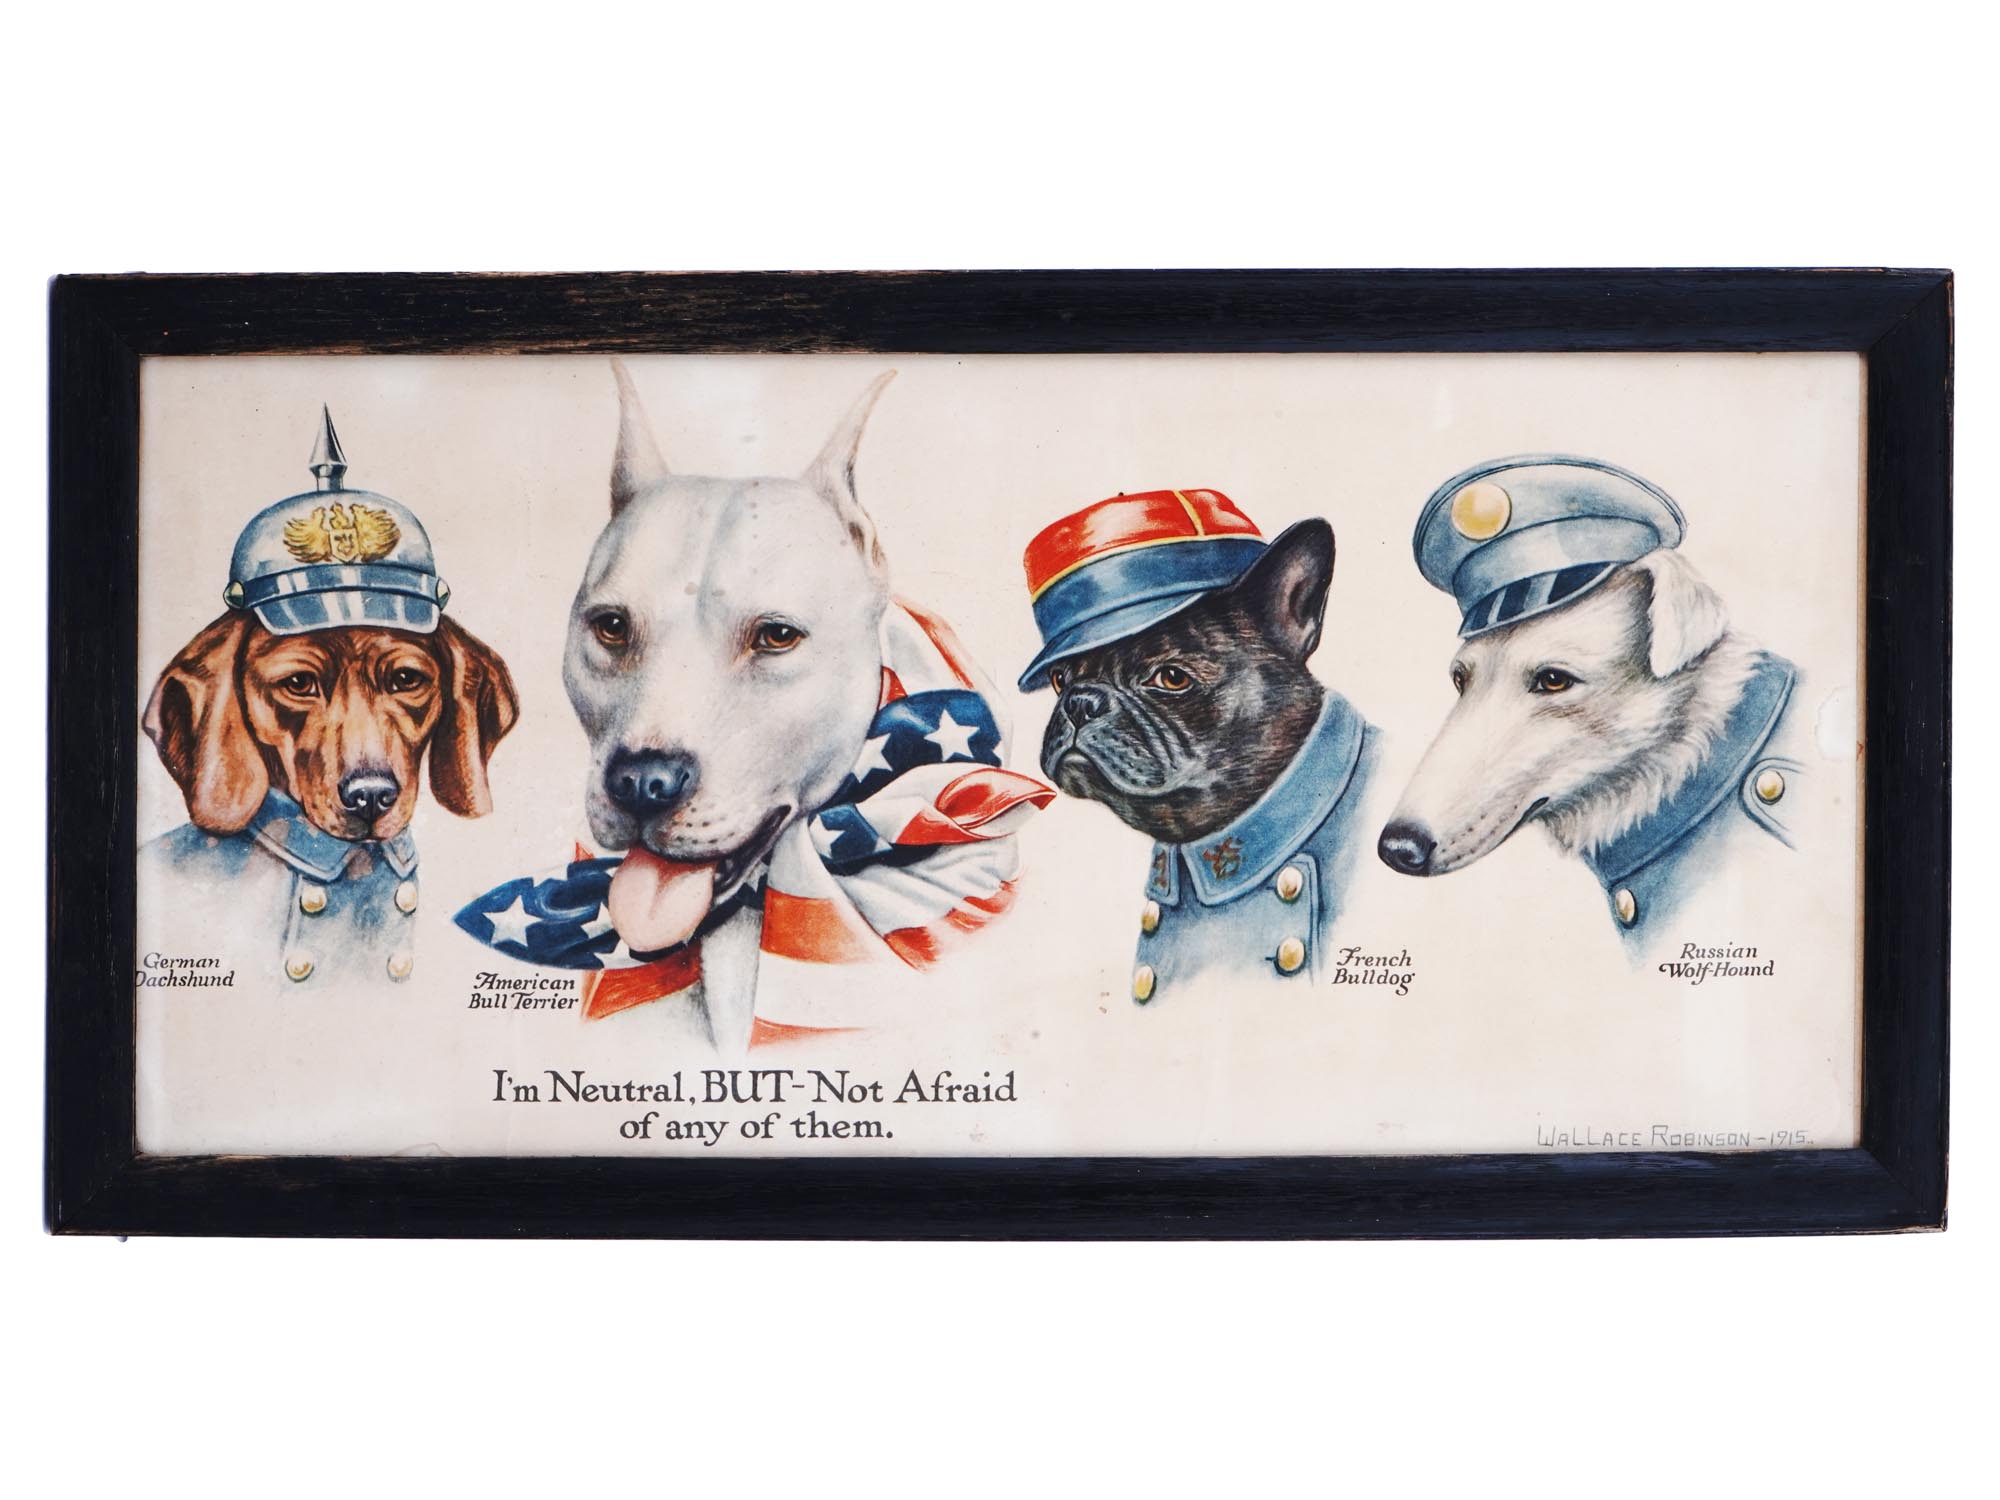 WWI POLITICAL DOGS LITHOGRAPH BY WALLACE ROBINSON PIC-0